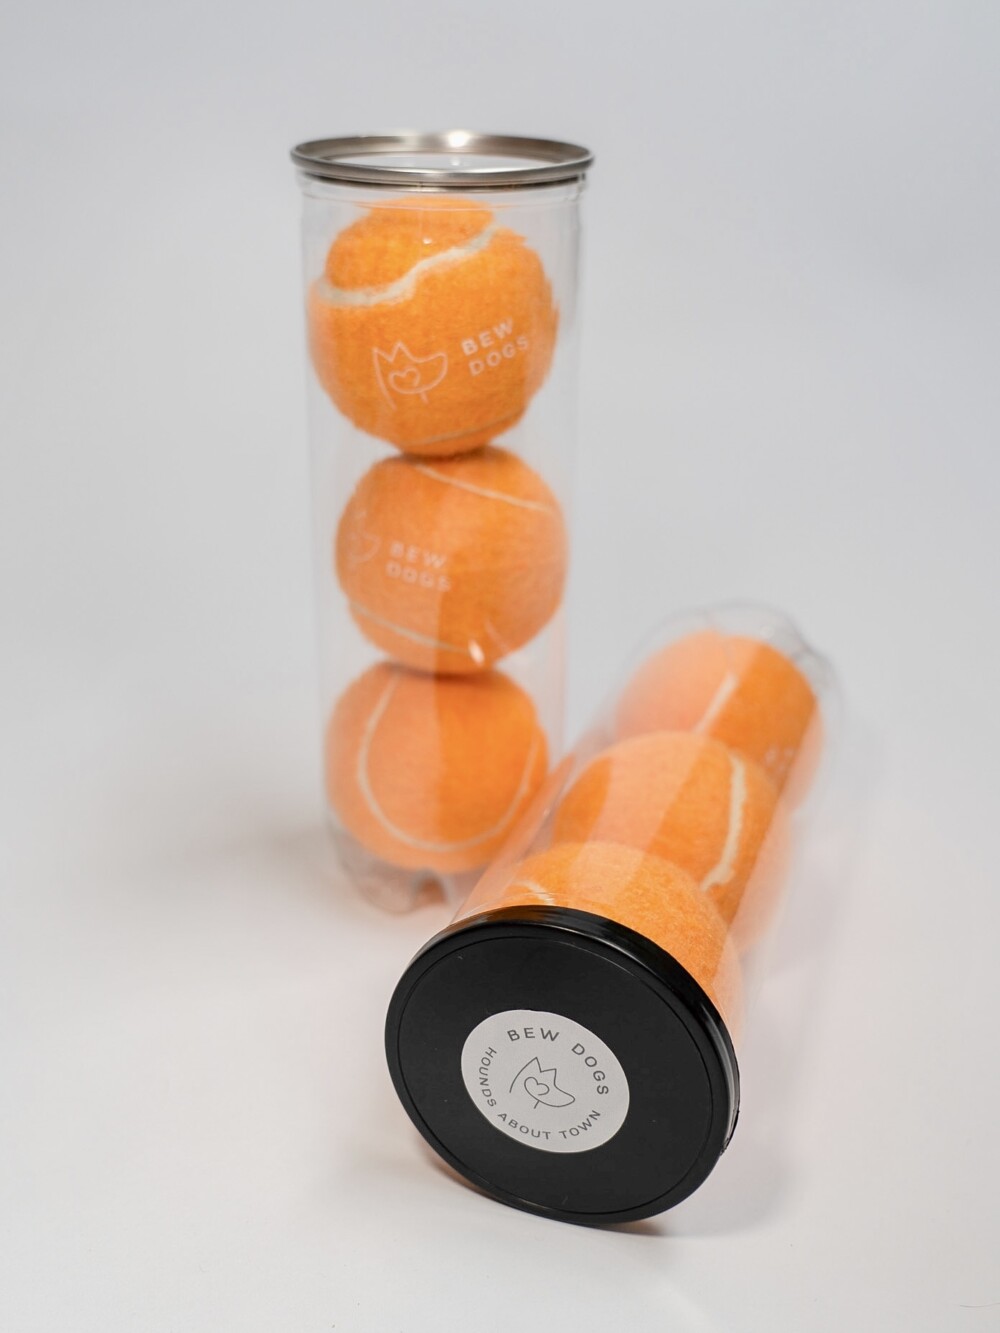 Two tubes, each containing three orange tennis balls for dogs